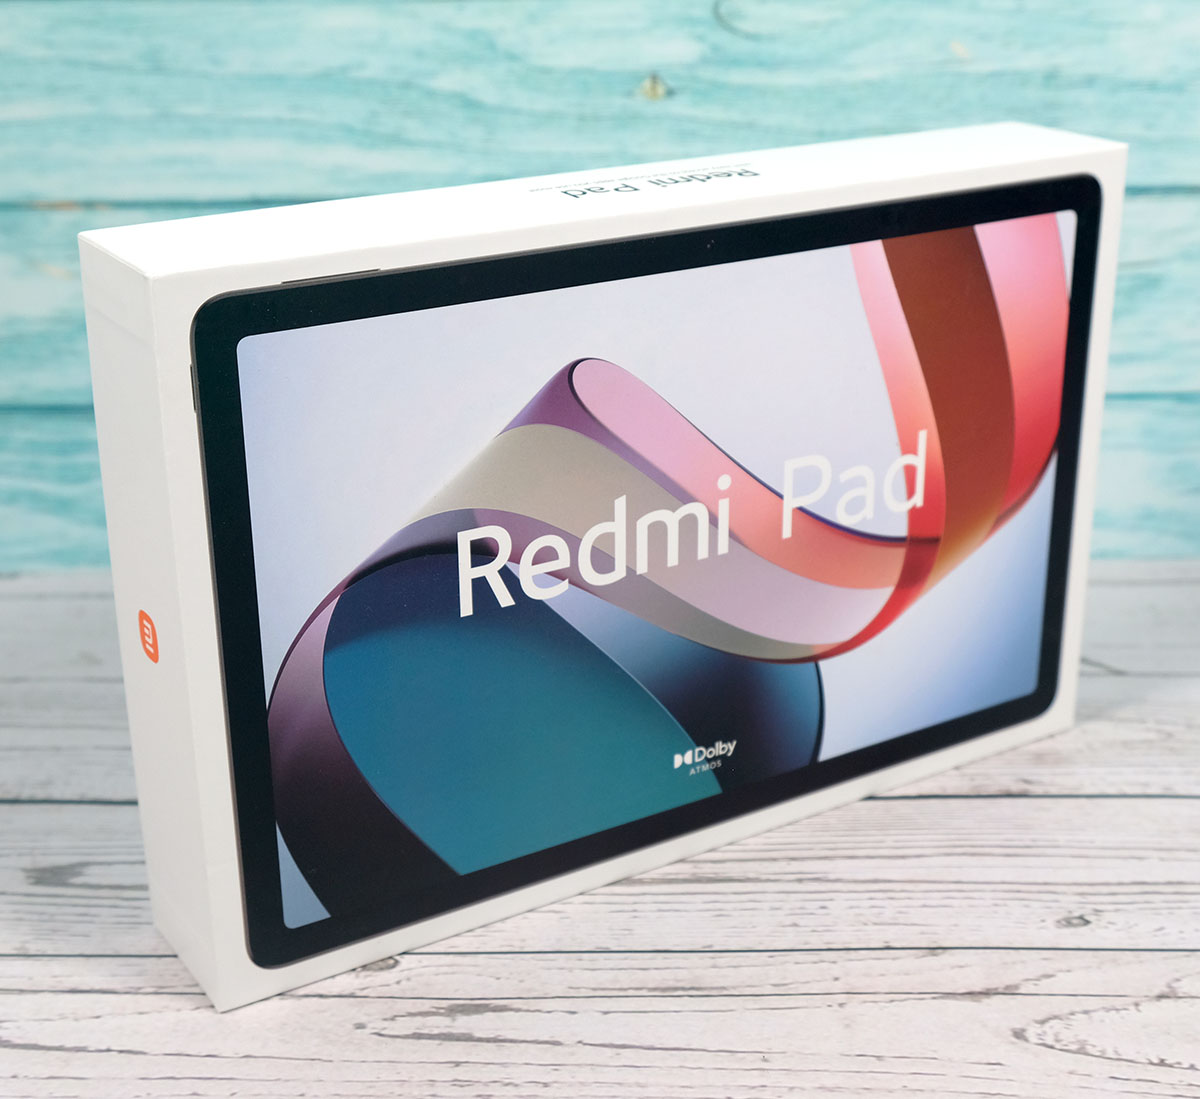 Xiaomi Redmi Pad SE Tablet (2023) - Unboxing and First Review